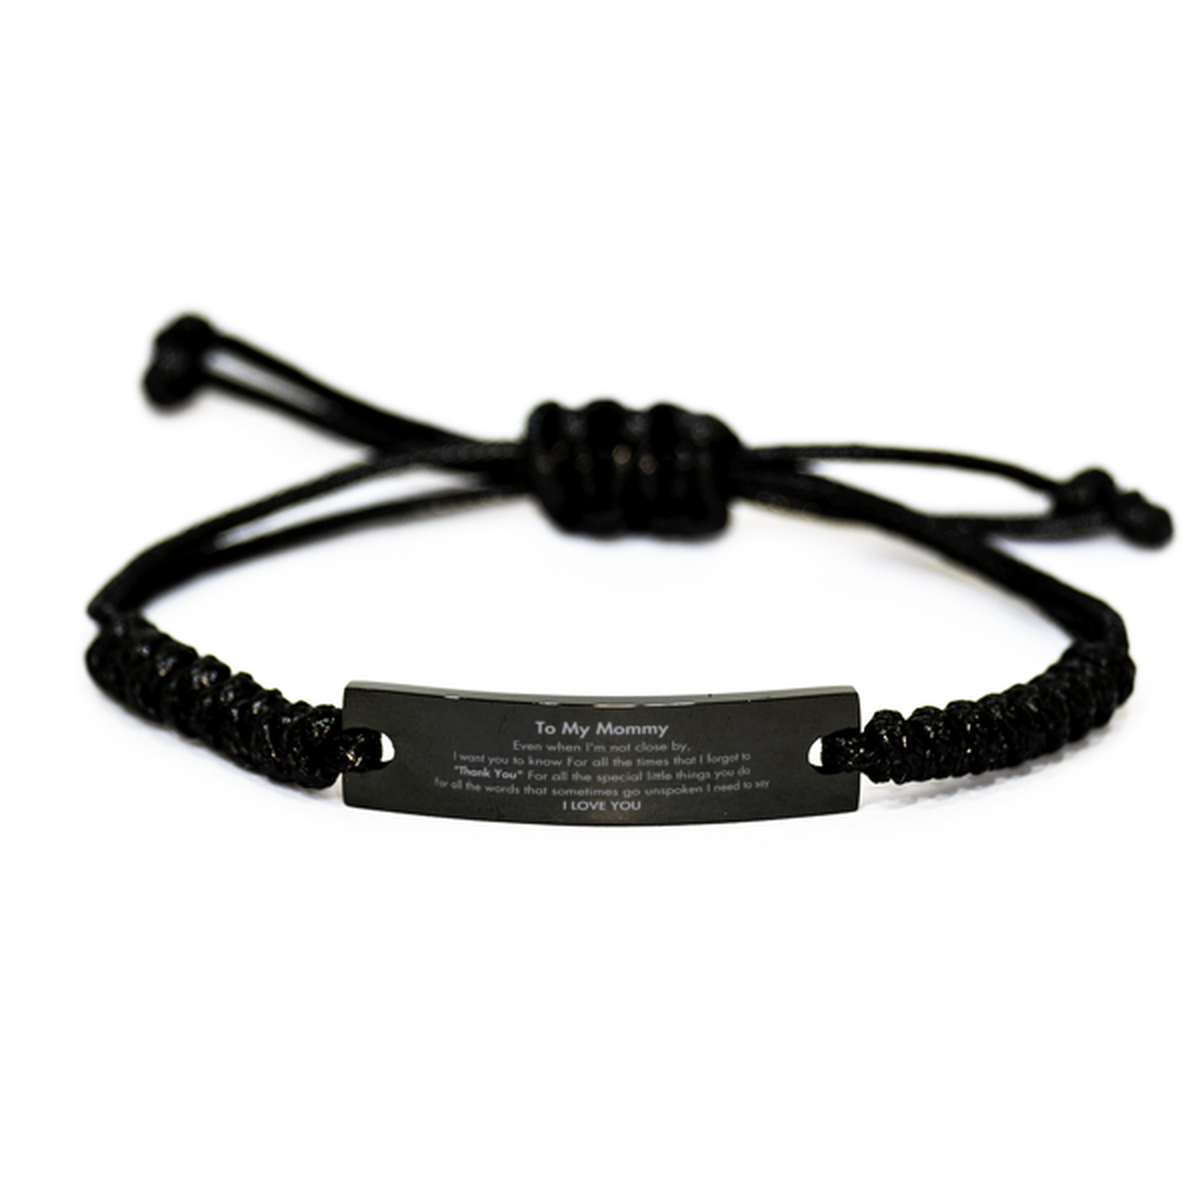 Thank You Gifts for Mommy, Keepsake Black Rope Bracelet Gifts for Mommy Birthday Mother's day Father's Day Mommy For all the words That sometimes go unspoken I need to say I LOVE YOU